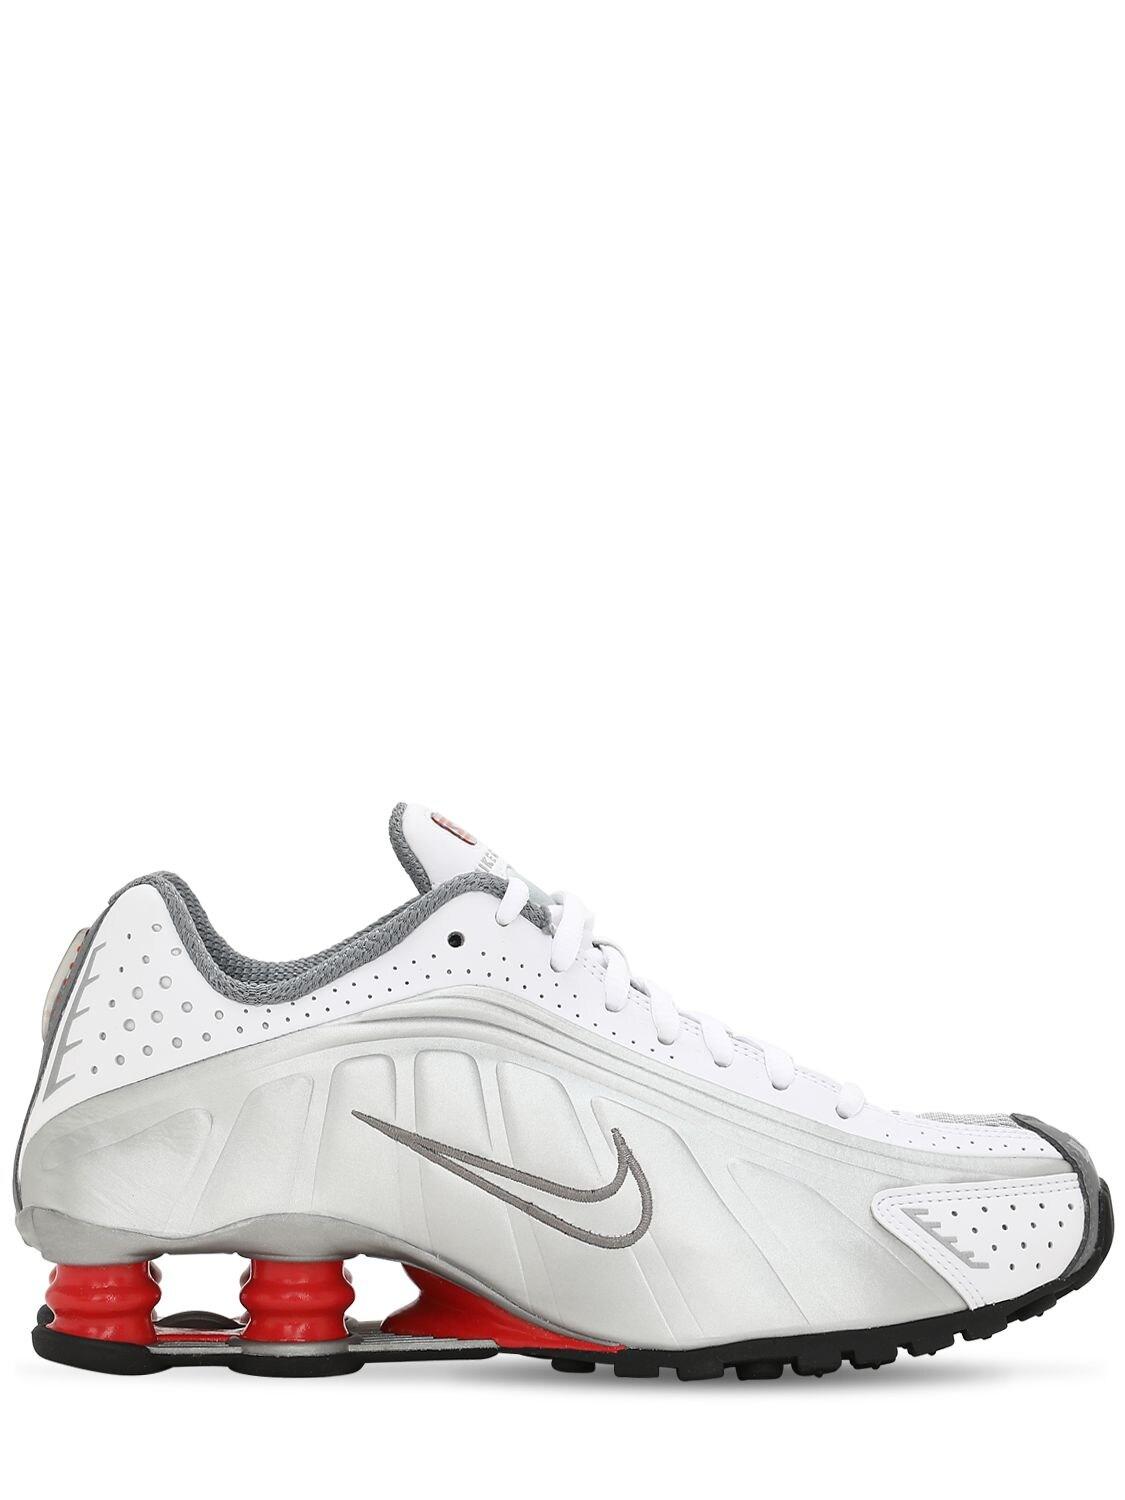 Nike Shox R4 Sneakers in White/Silver (White) - Lyst